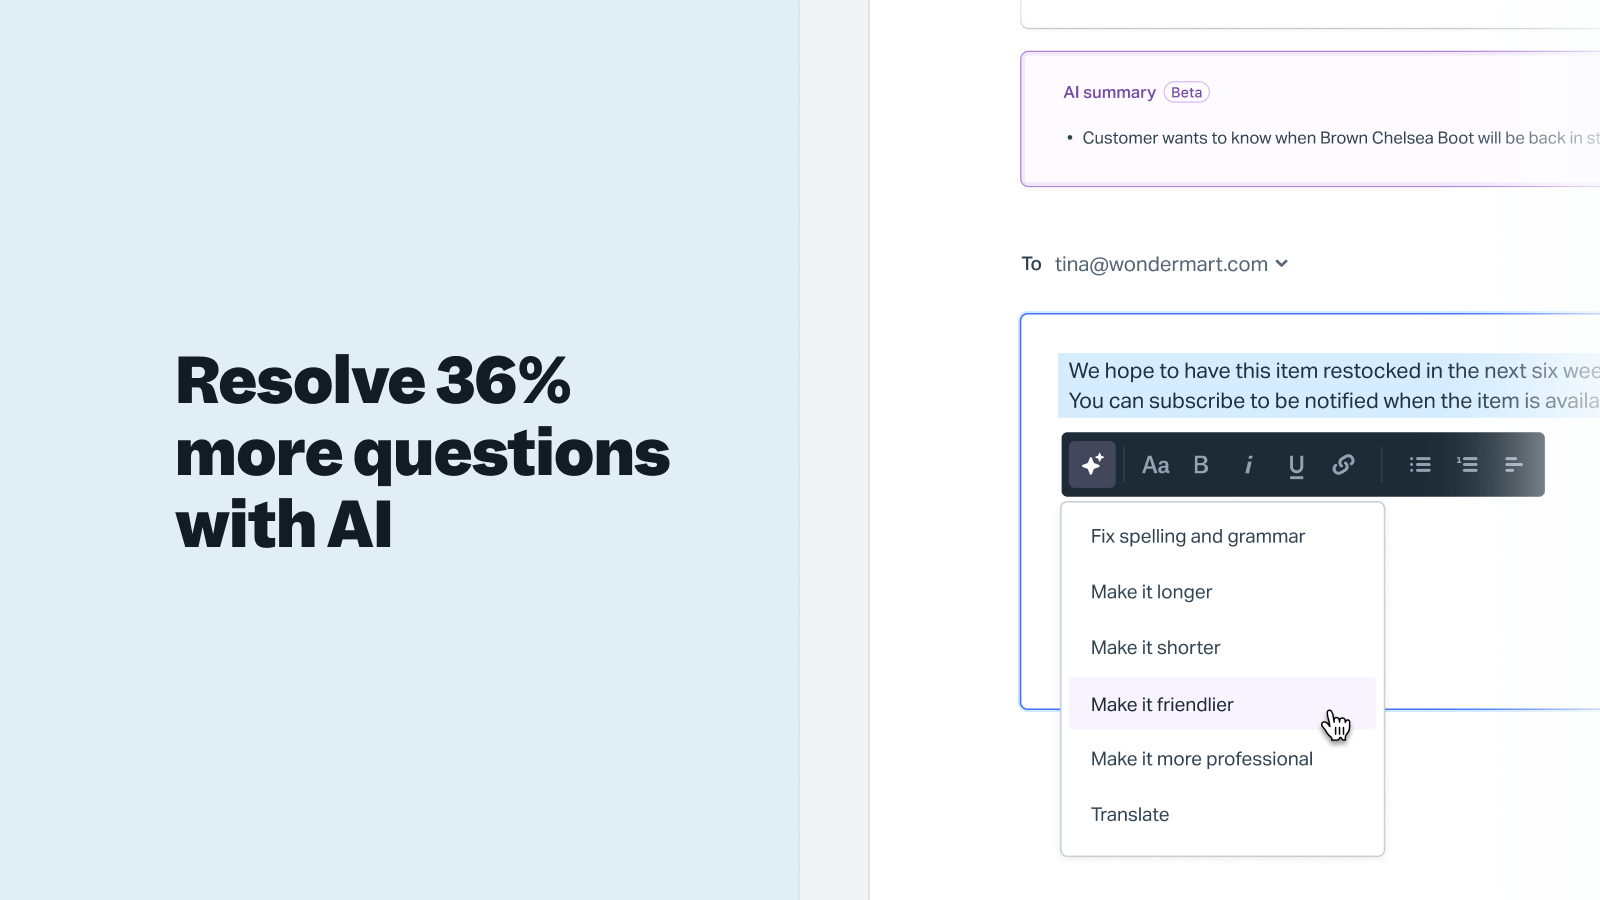 Resolve 36% more questions with AI